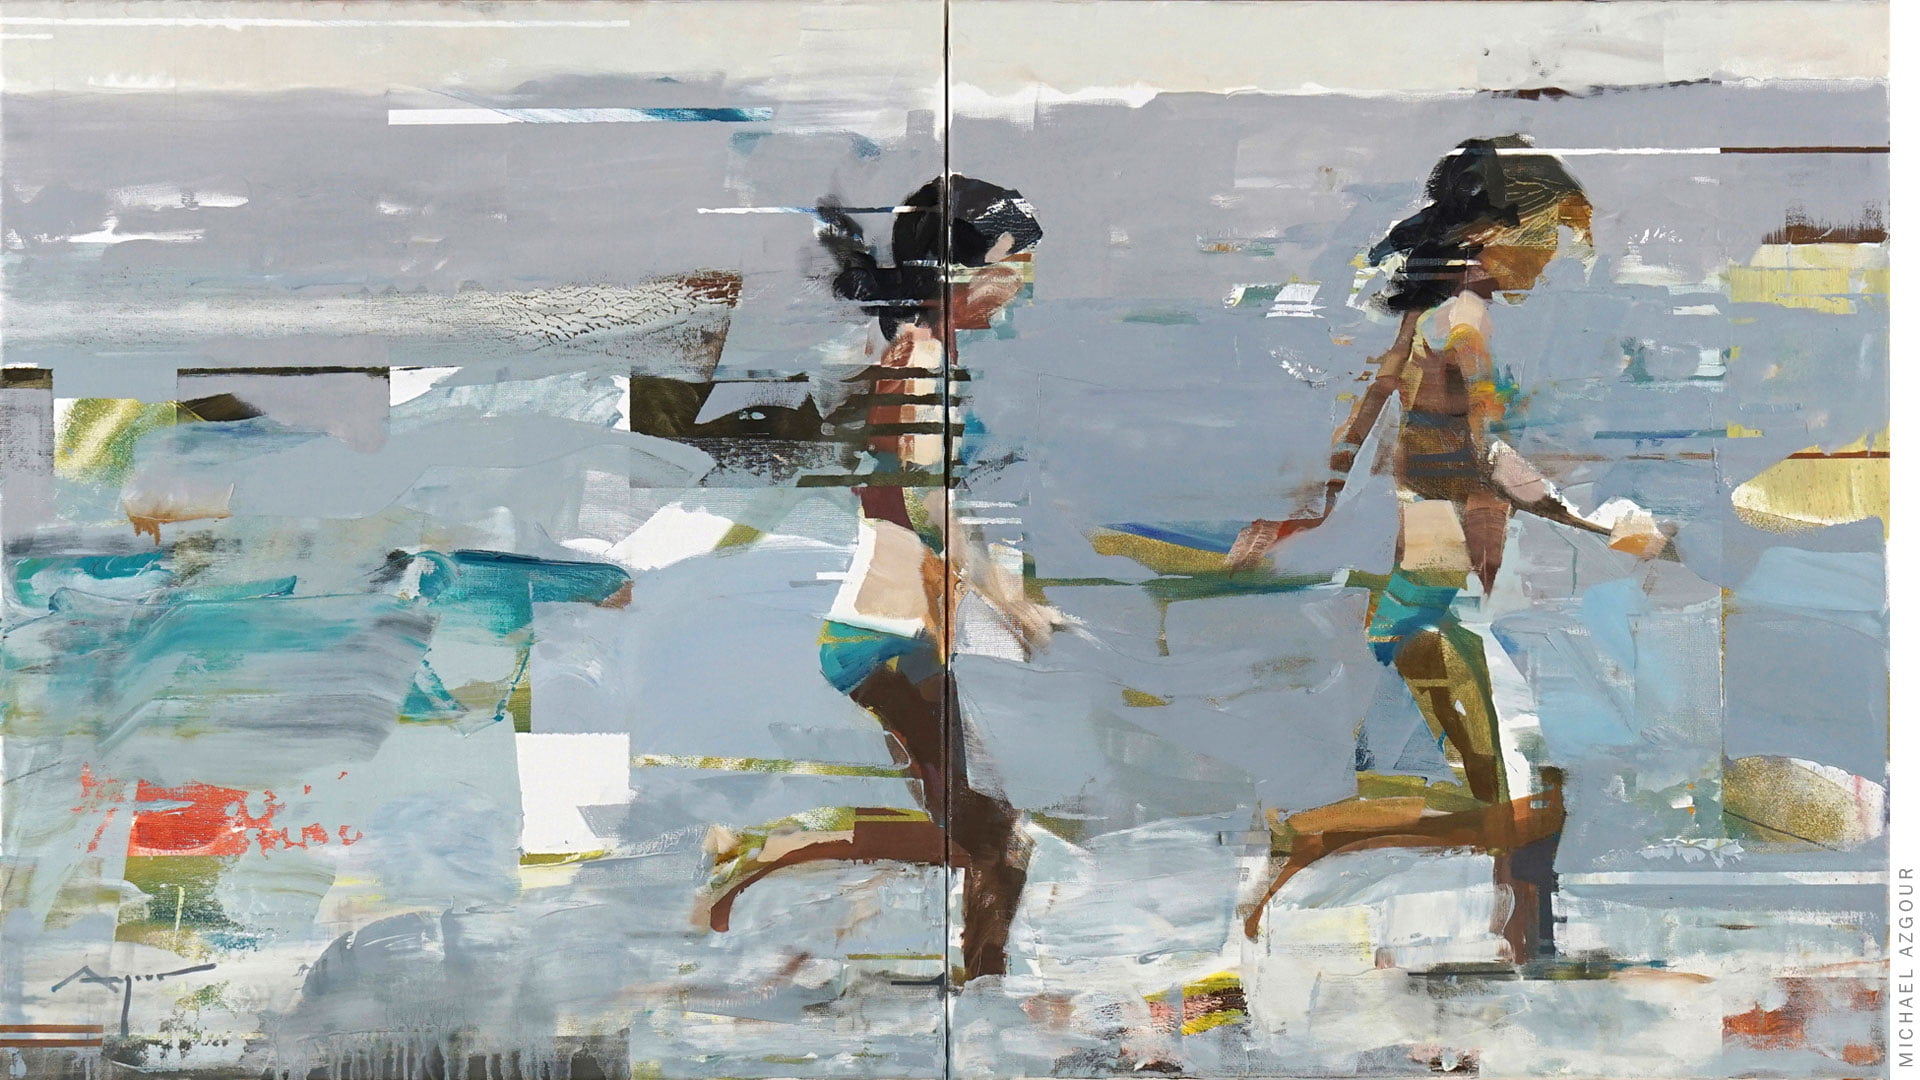 A girl running on the shore portrayed in two separate instances split seconds apart in this expressive painting by Michael Azgour, titled, On the Shore 1